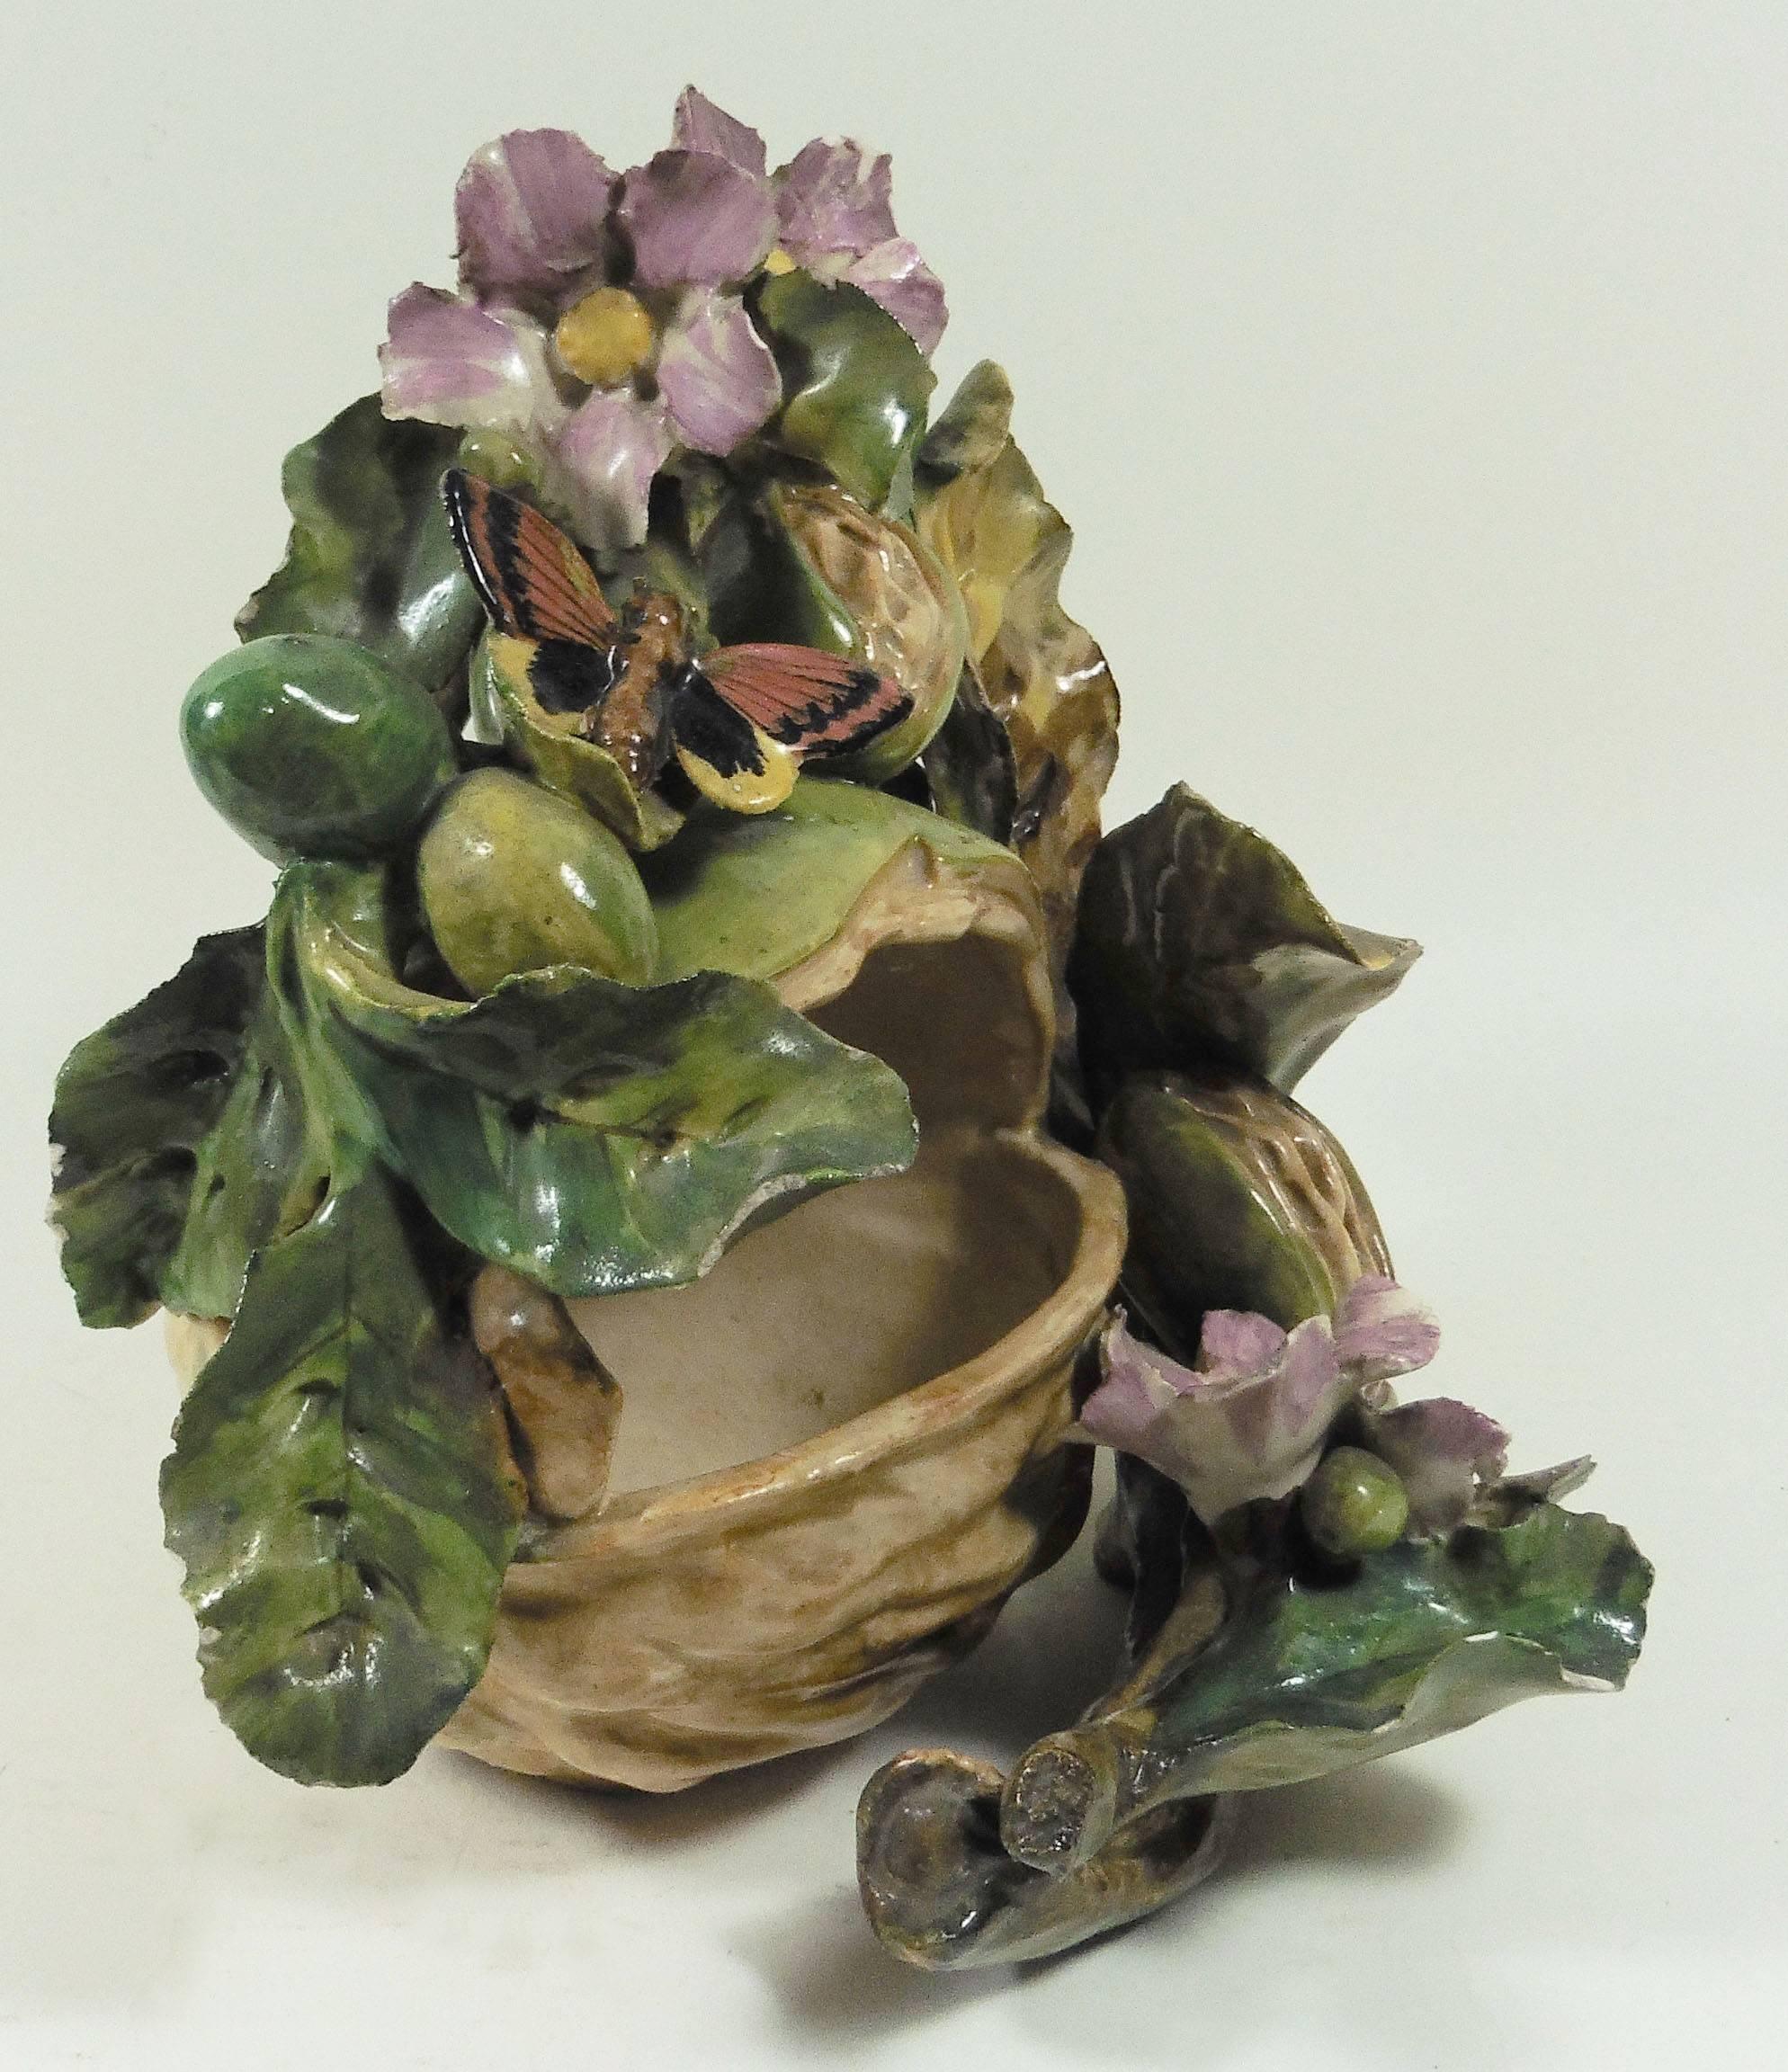 Unusual French Majolica large nut surrounded by leaves and pink flowers, a red butterfly against the leaves, circa 1880, signed Jean Pointu.
Several pieces in this style with high relief flowers was made at the end of 19th century, associate to the